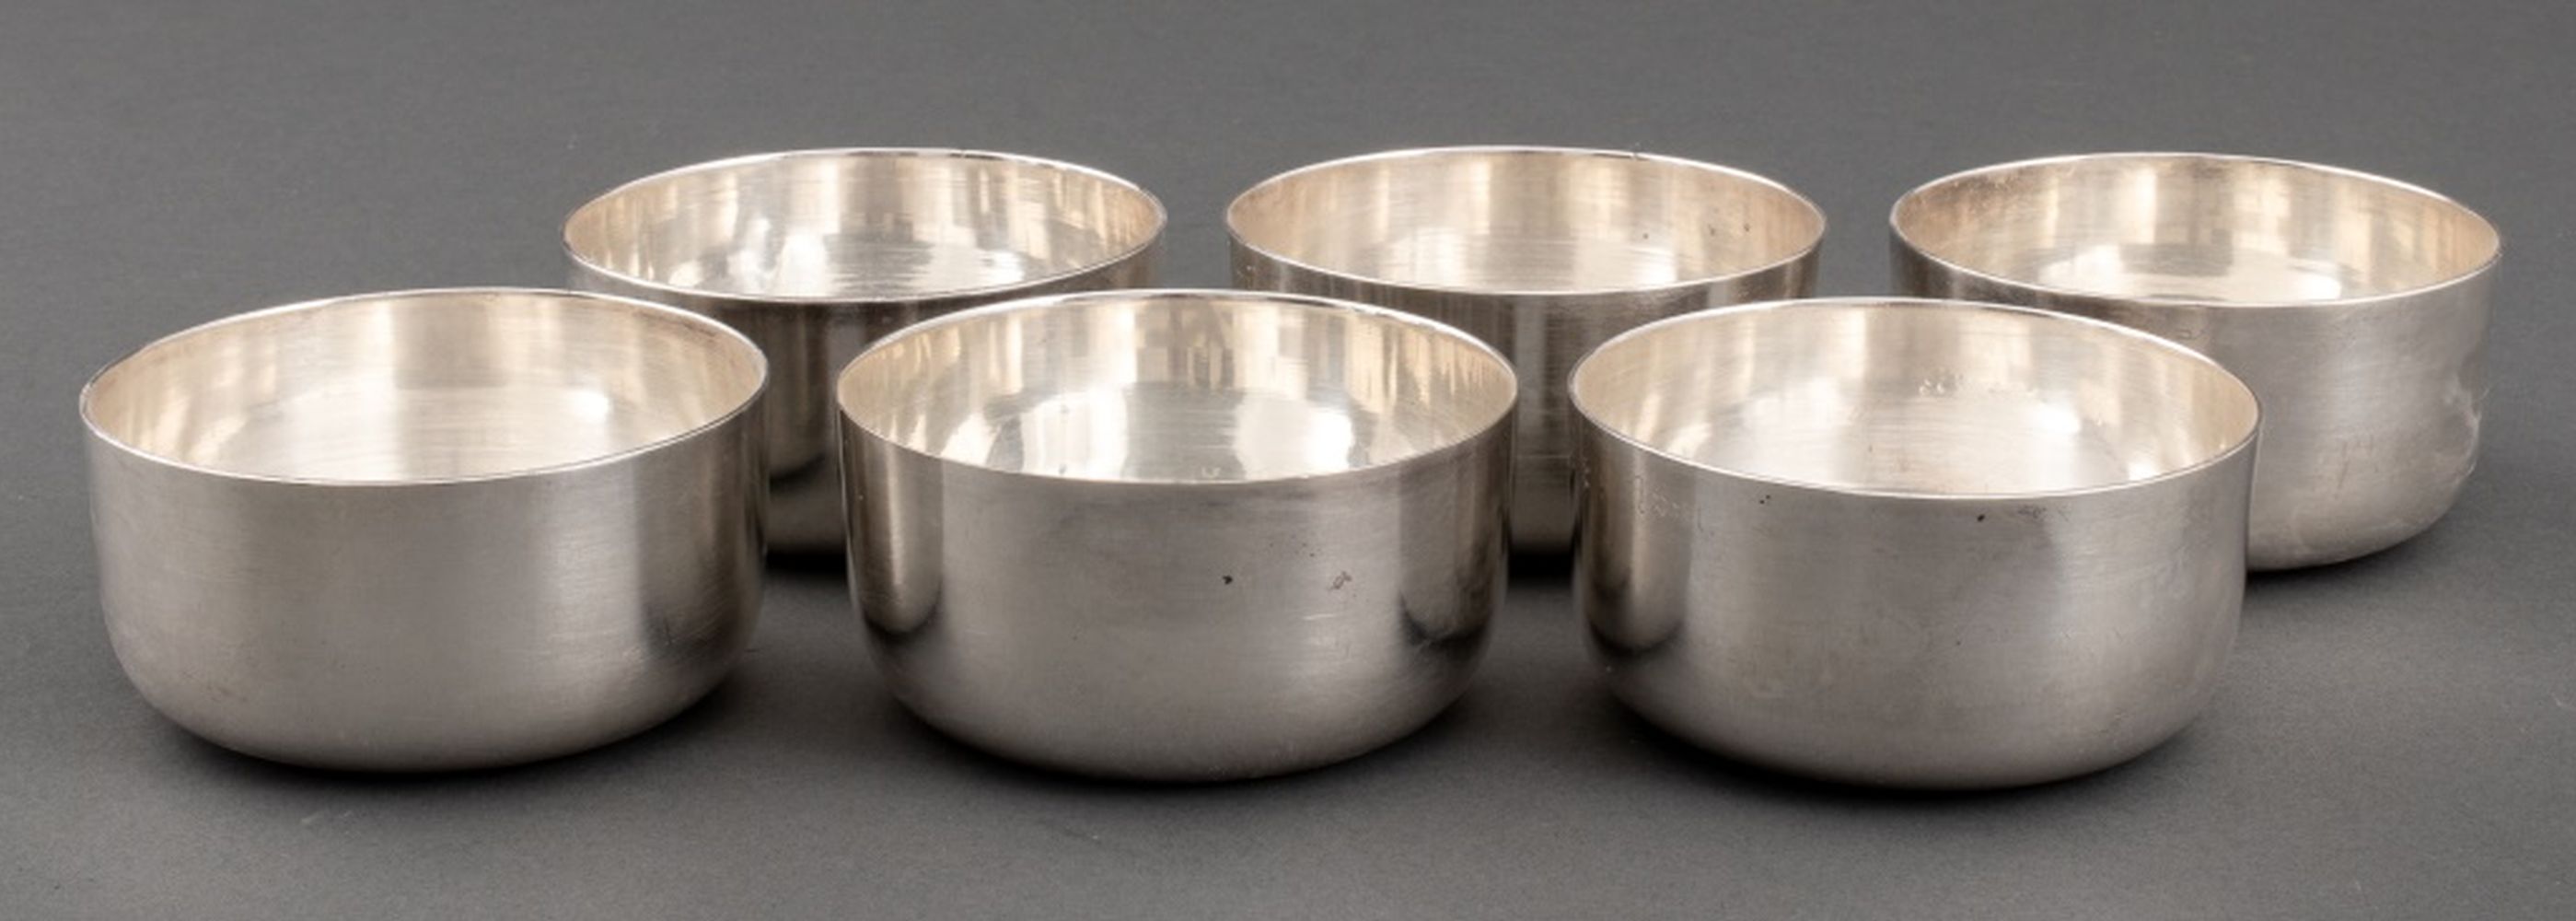 INDIAN SILVER RICE BOWLS, 6 Group